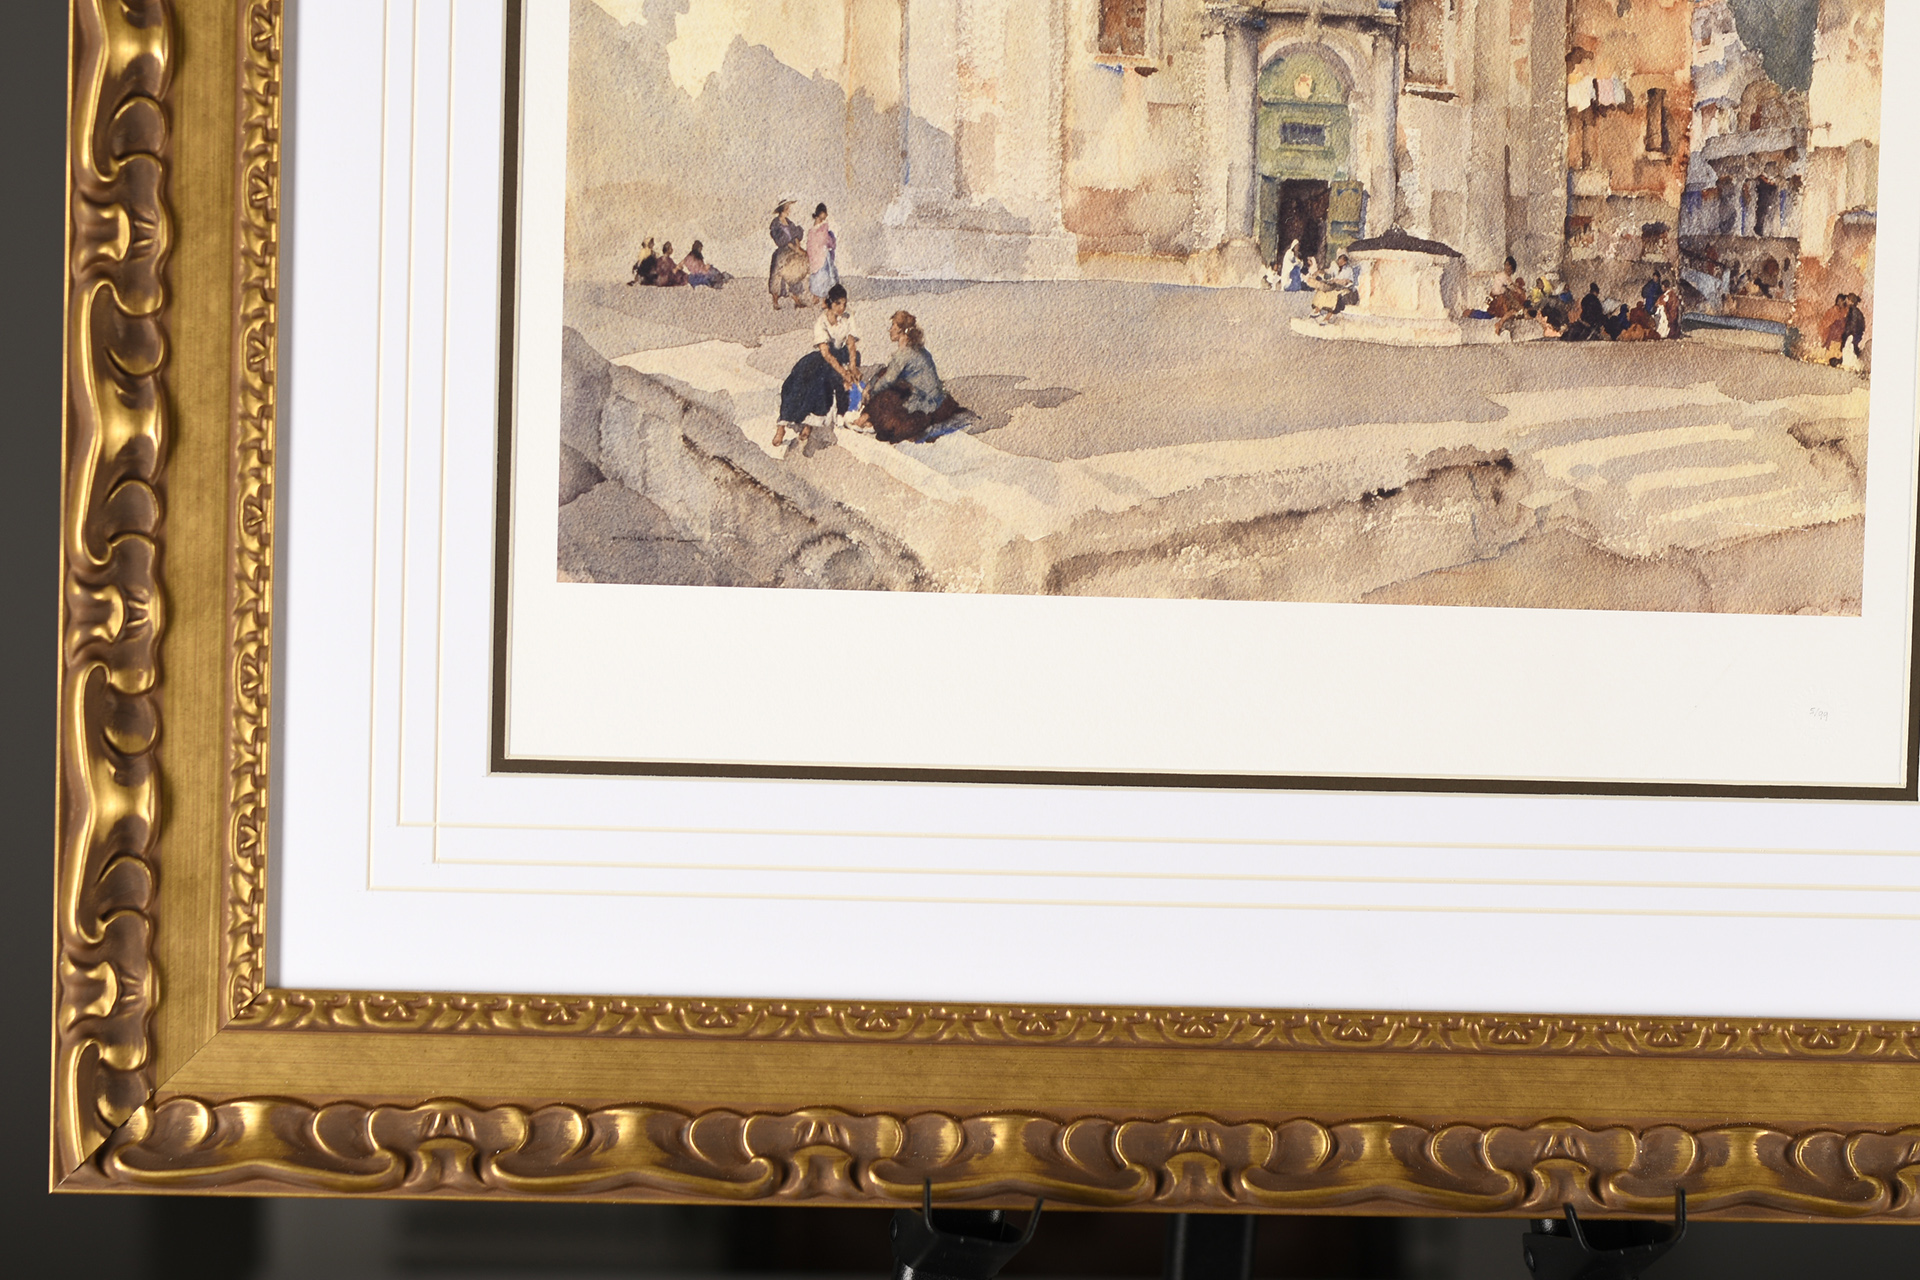 Sir Russell Flint Limited Edition "Campo San Trovaso, Venice" - Image 5 of 9